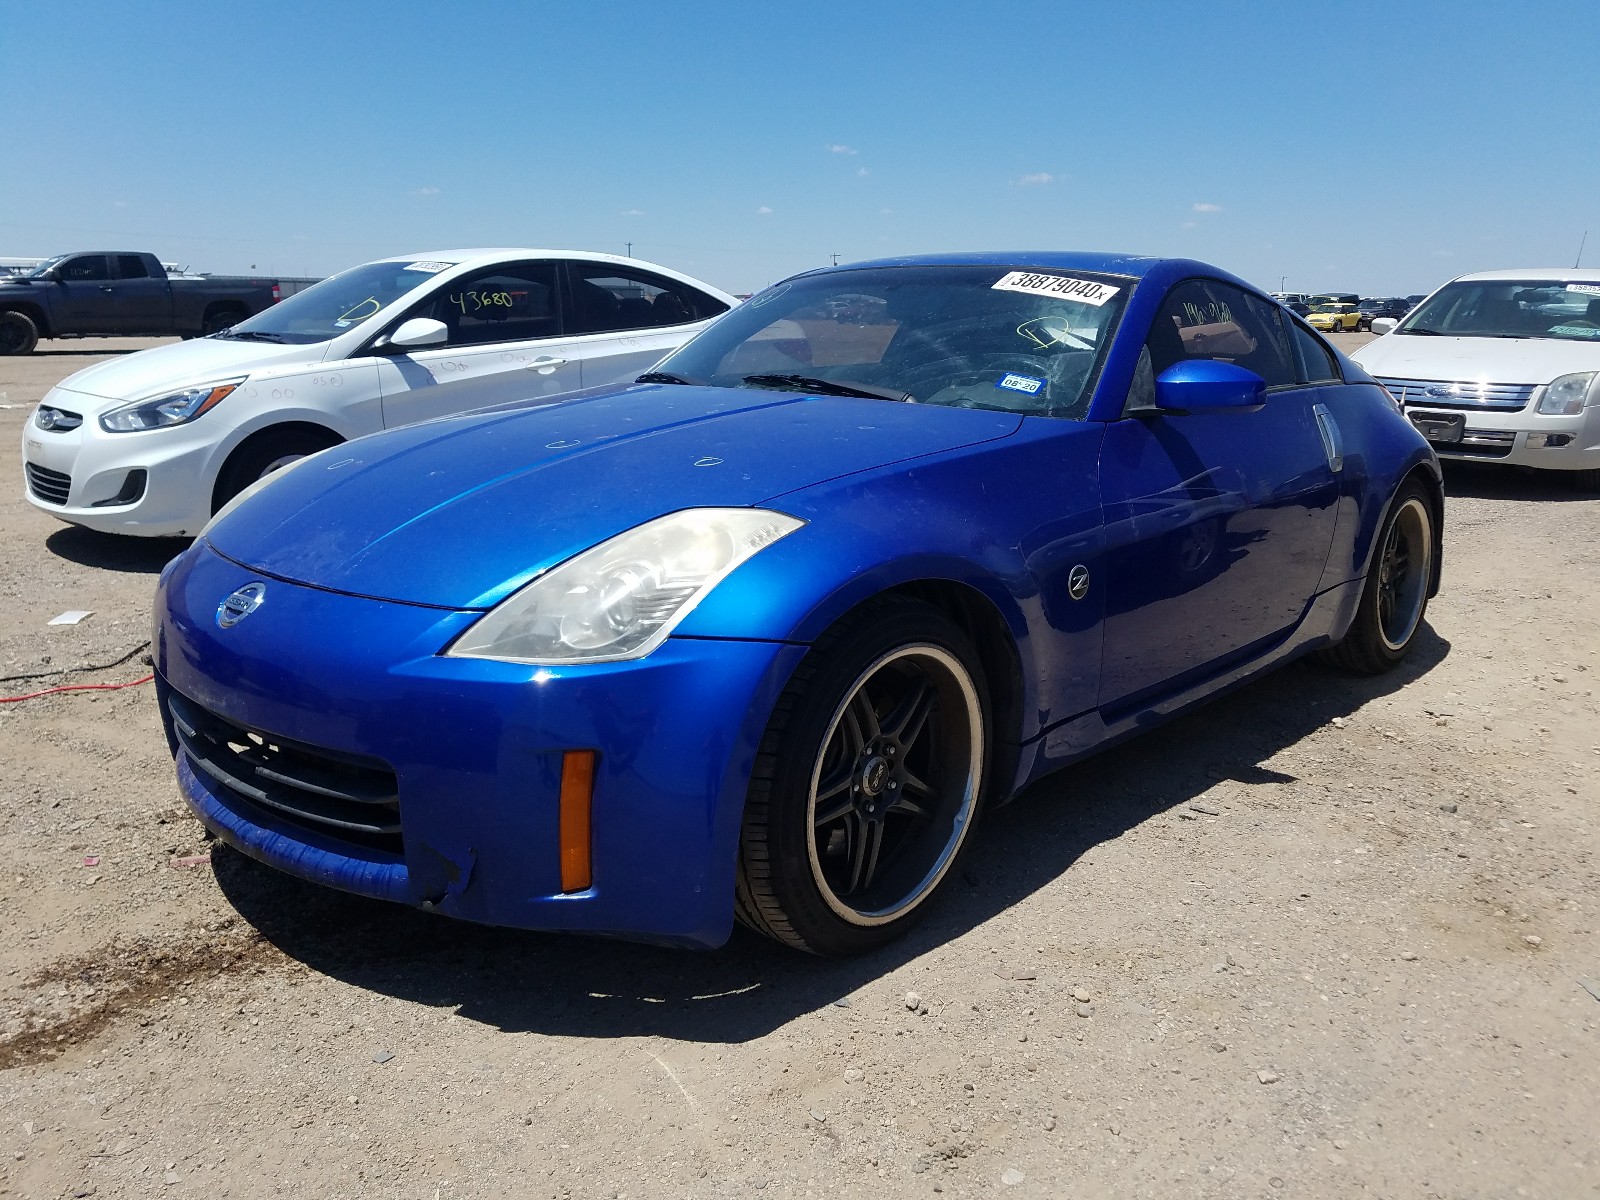 2006 Nissan 350Z Coupe 3.5L 6 in TX Amarillo